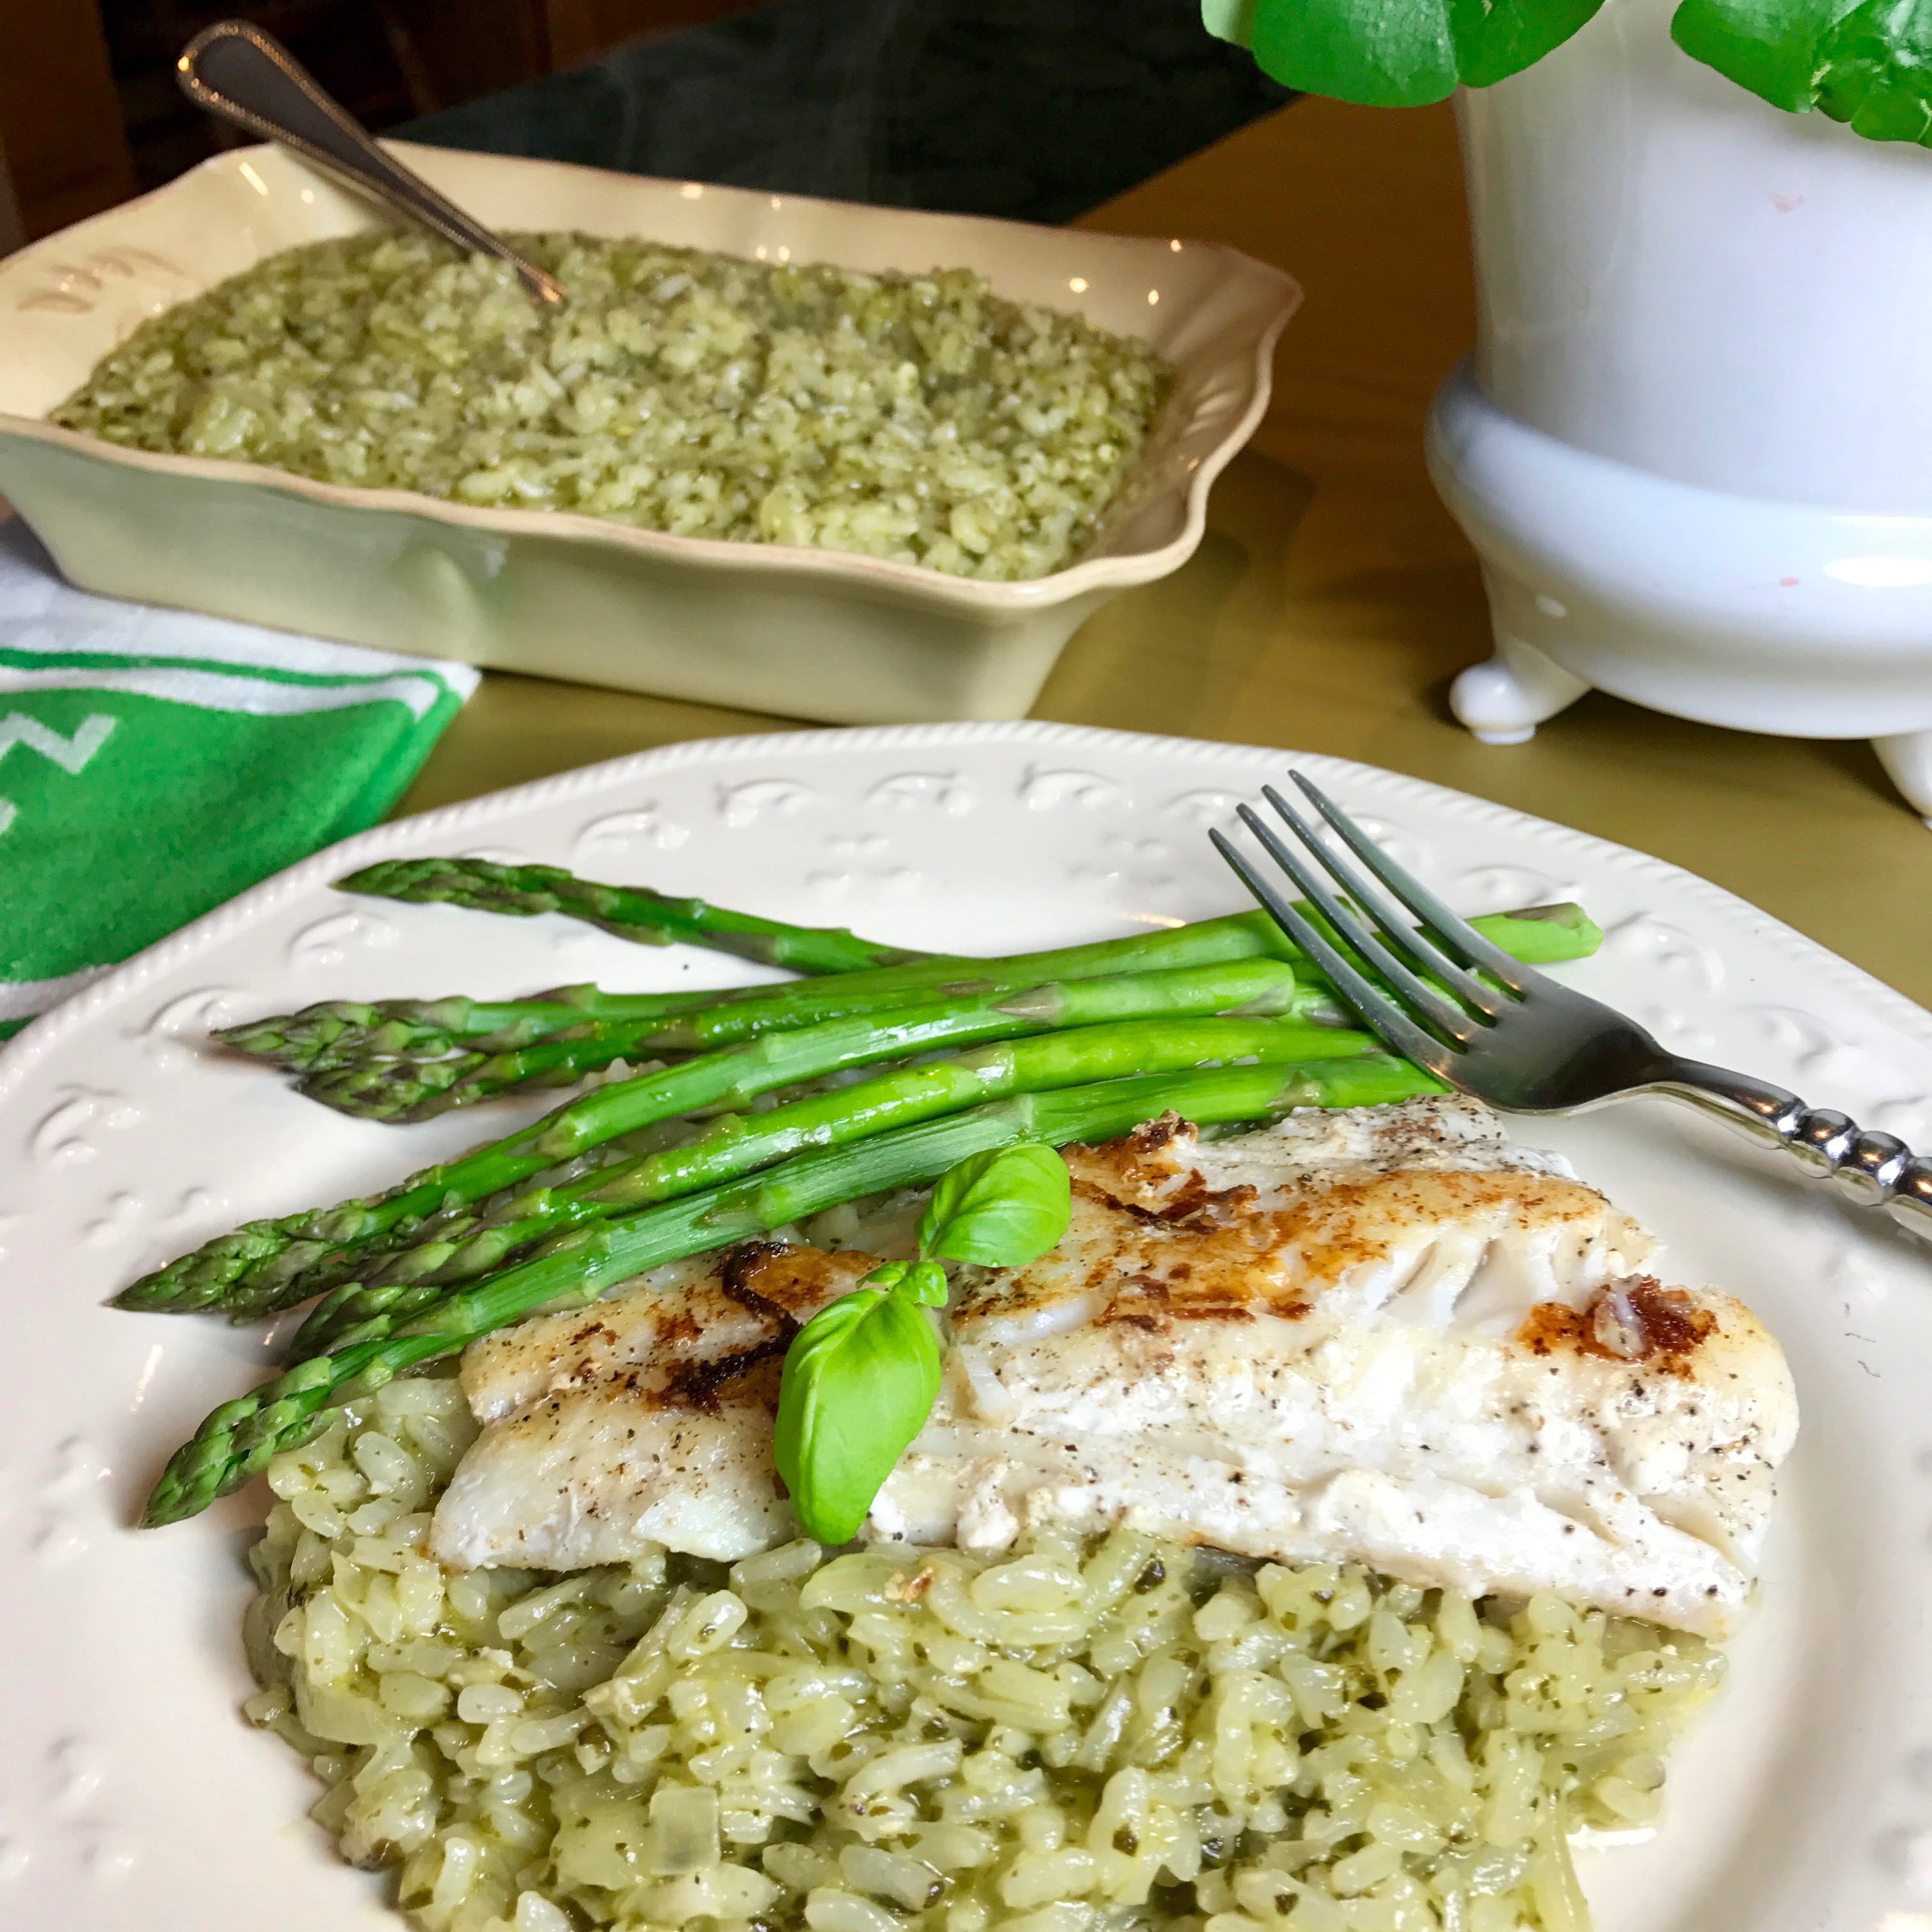 Pan Roasted Cod on Spinach Basil Risotto